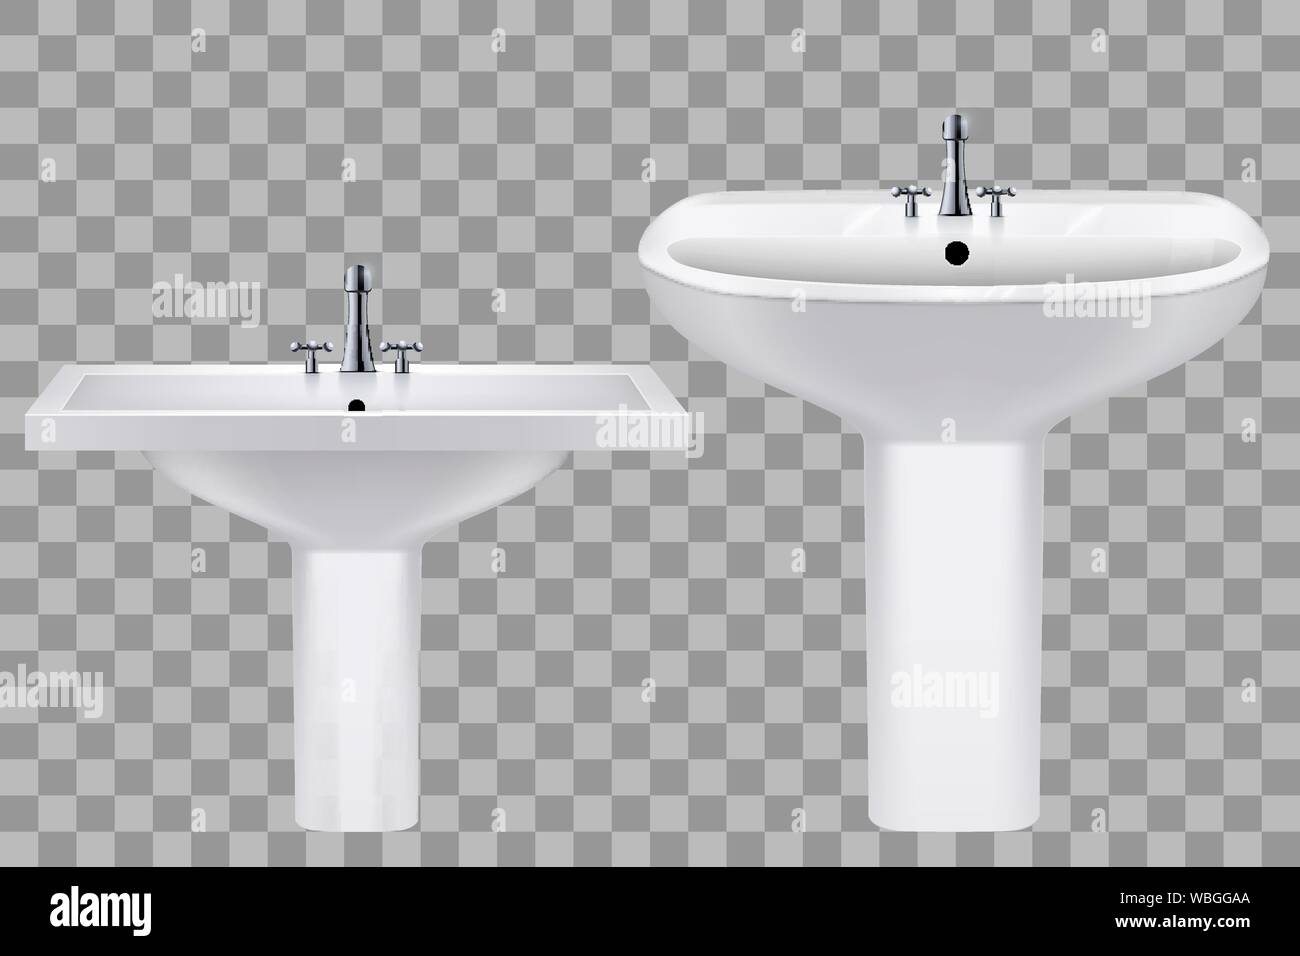 Classic white ceramic washbasins with water tap Stock Vector